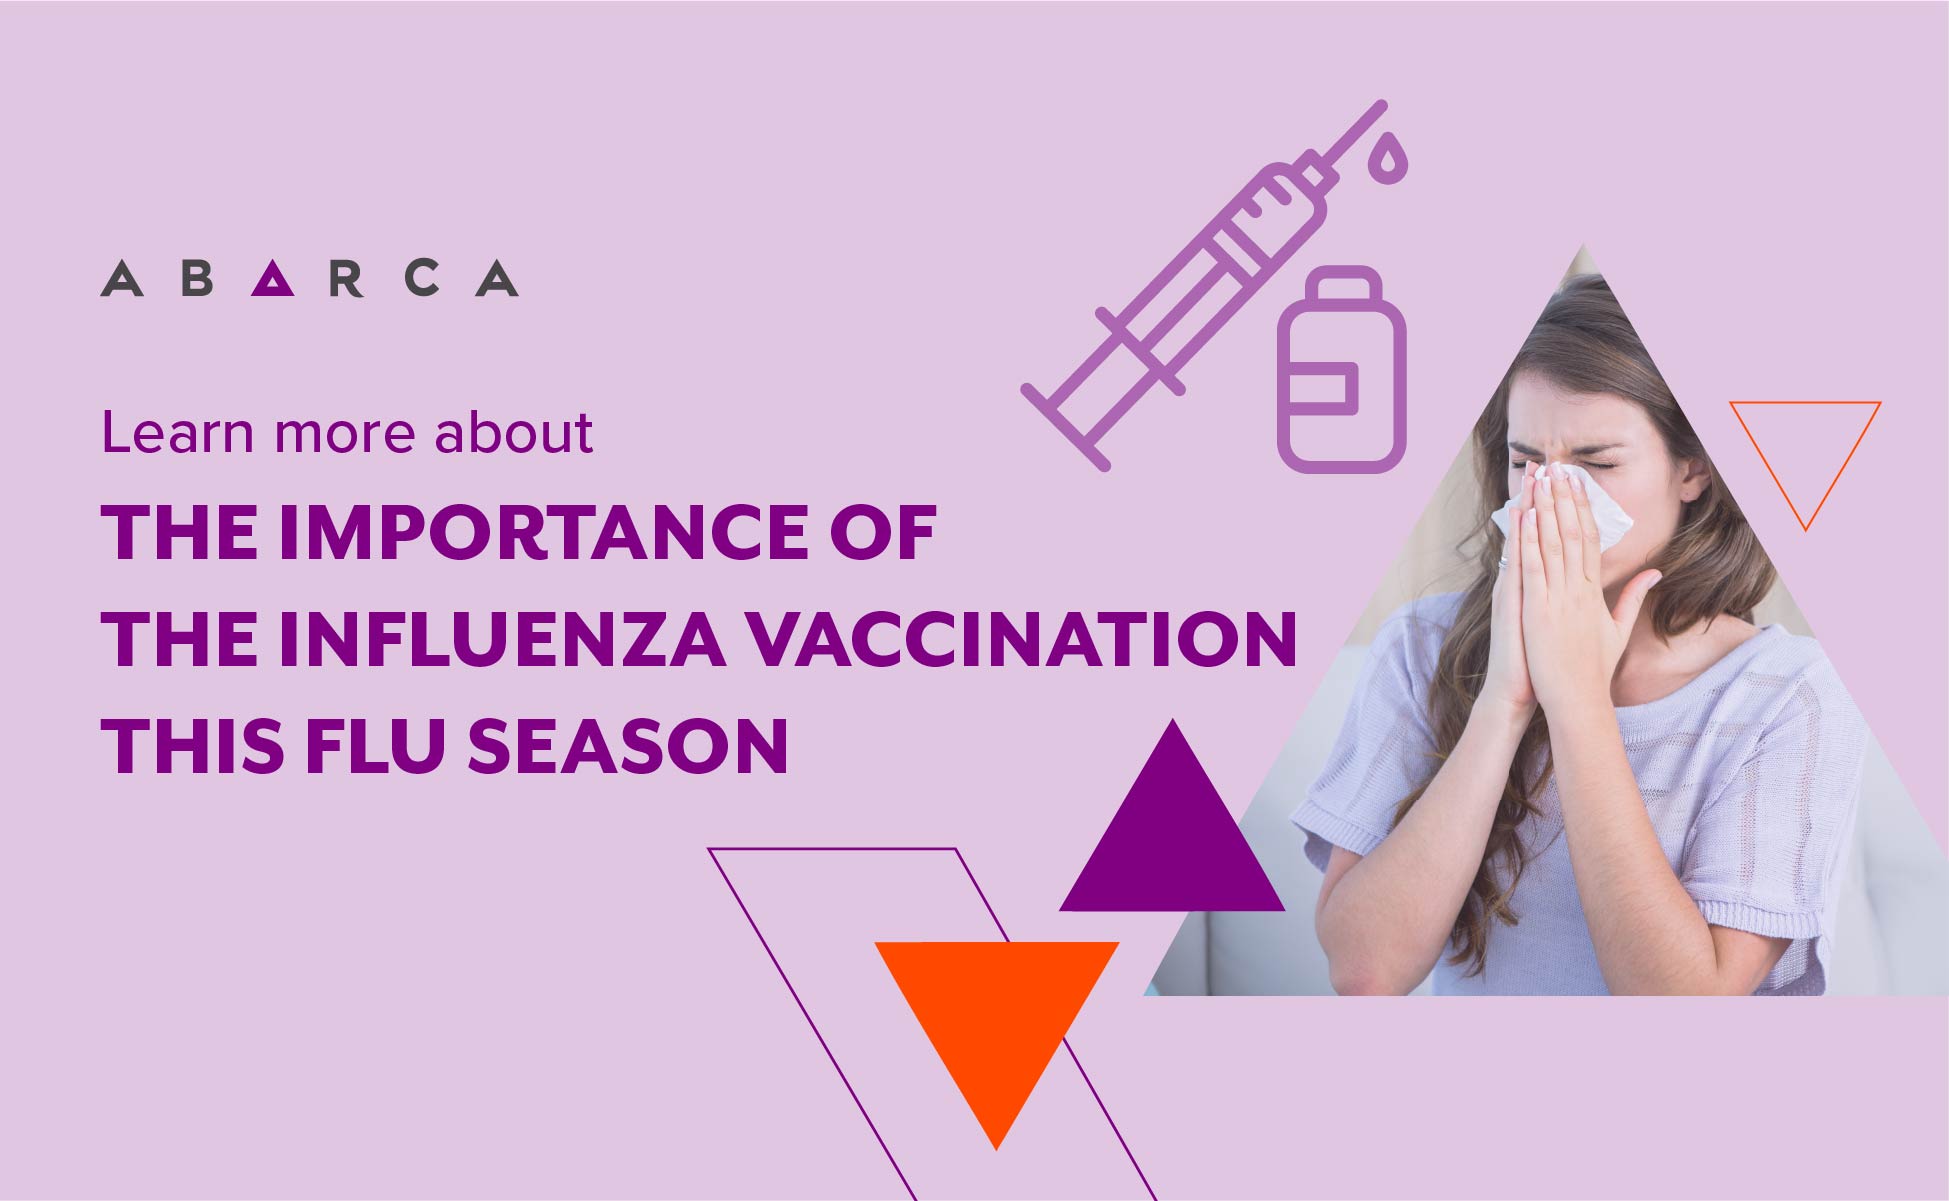 Abarca spreads the word on the benefits of the flu vaccination in a post Covid-19 climate